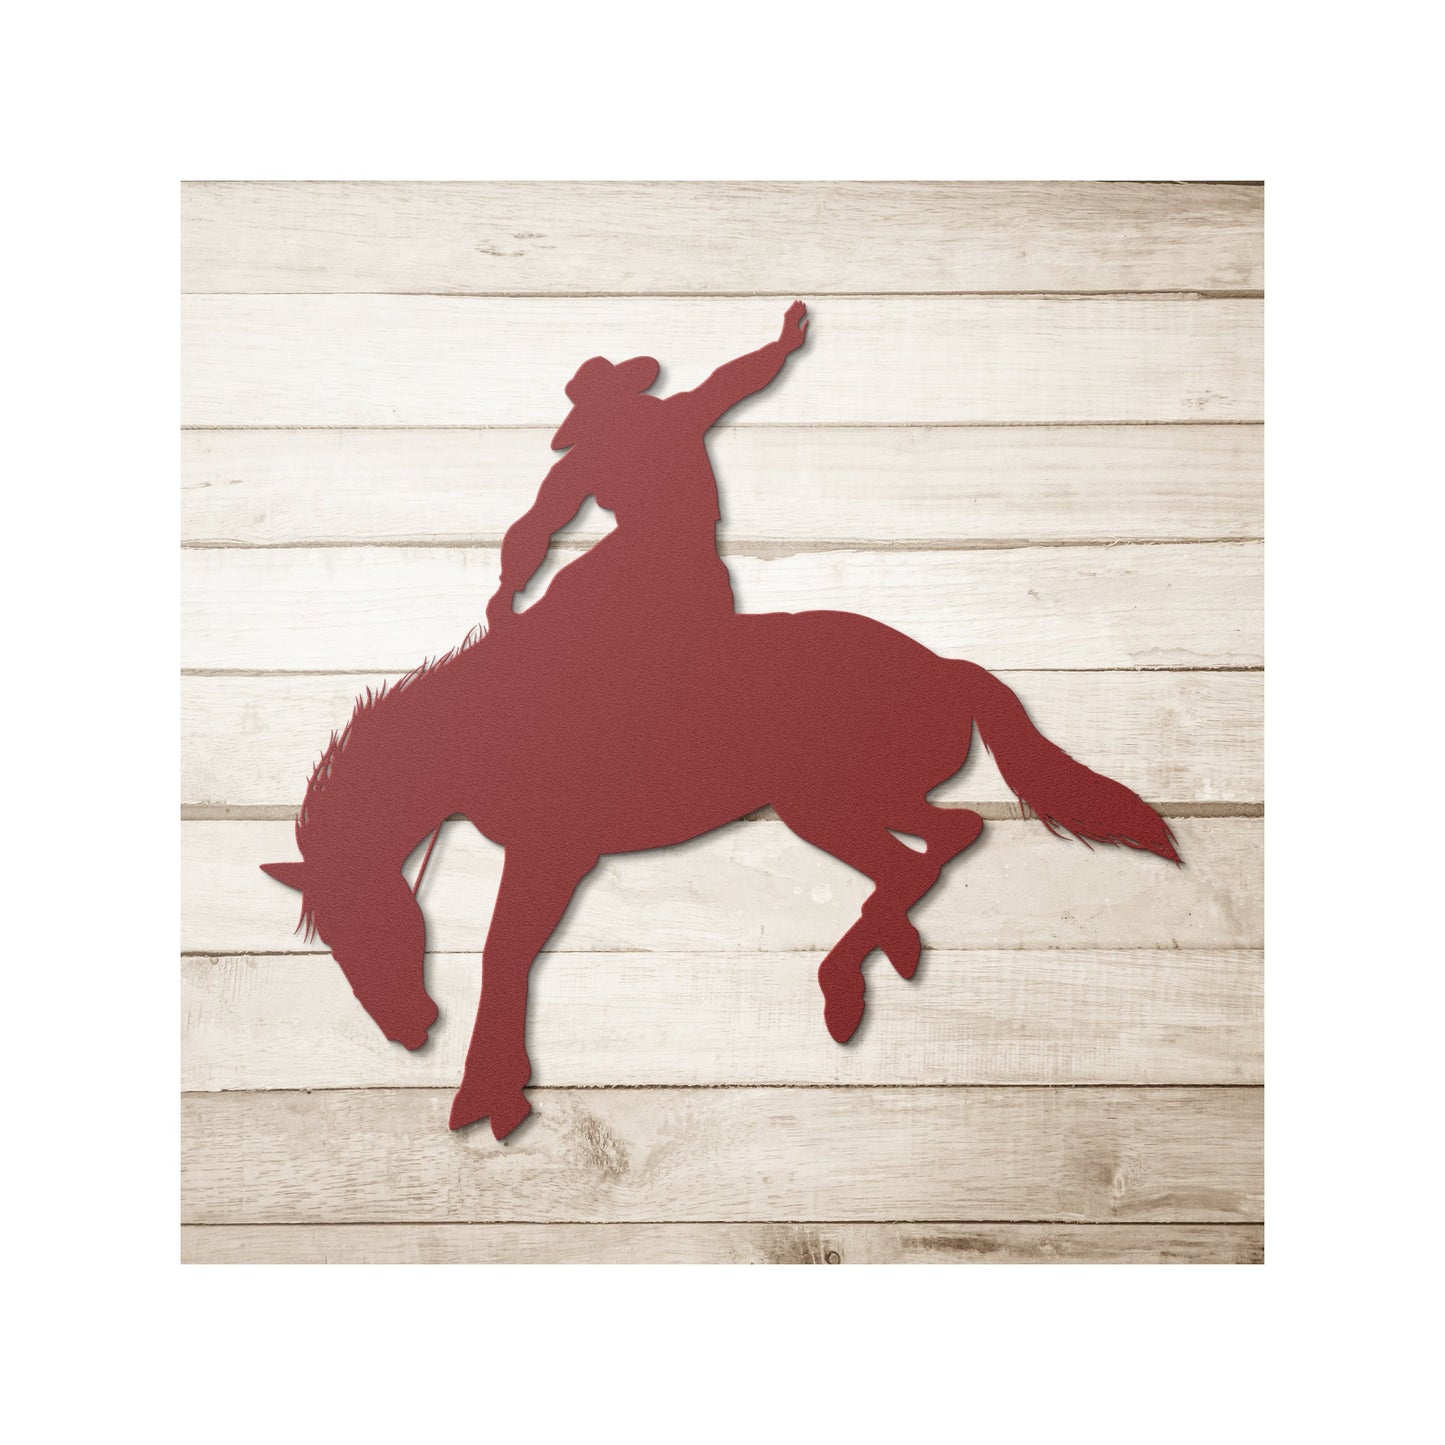 Cowboy Western Bucking Horse Custom Metal Wall Decor Rustic Rodeo Artwork Room Wall Hangings Wyoming Bucking Bronc Riding Sign for Ranch